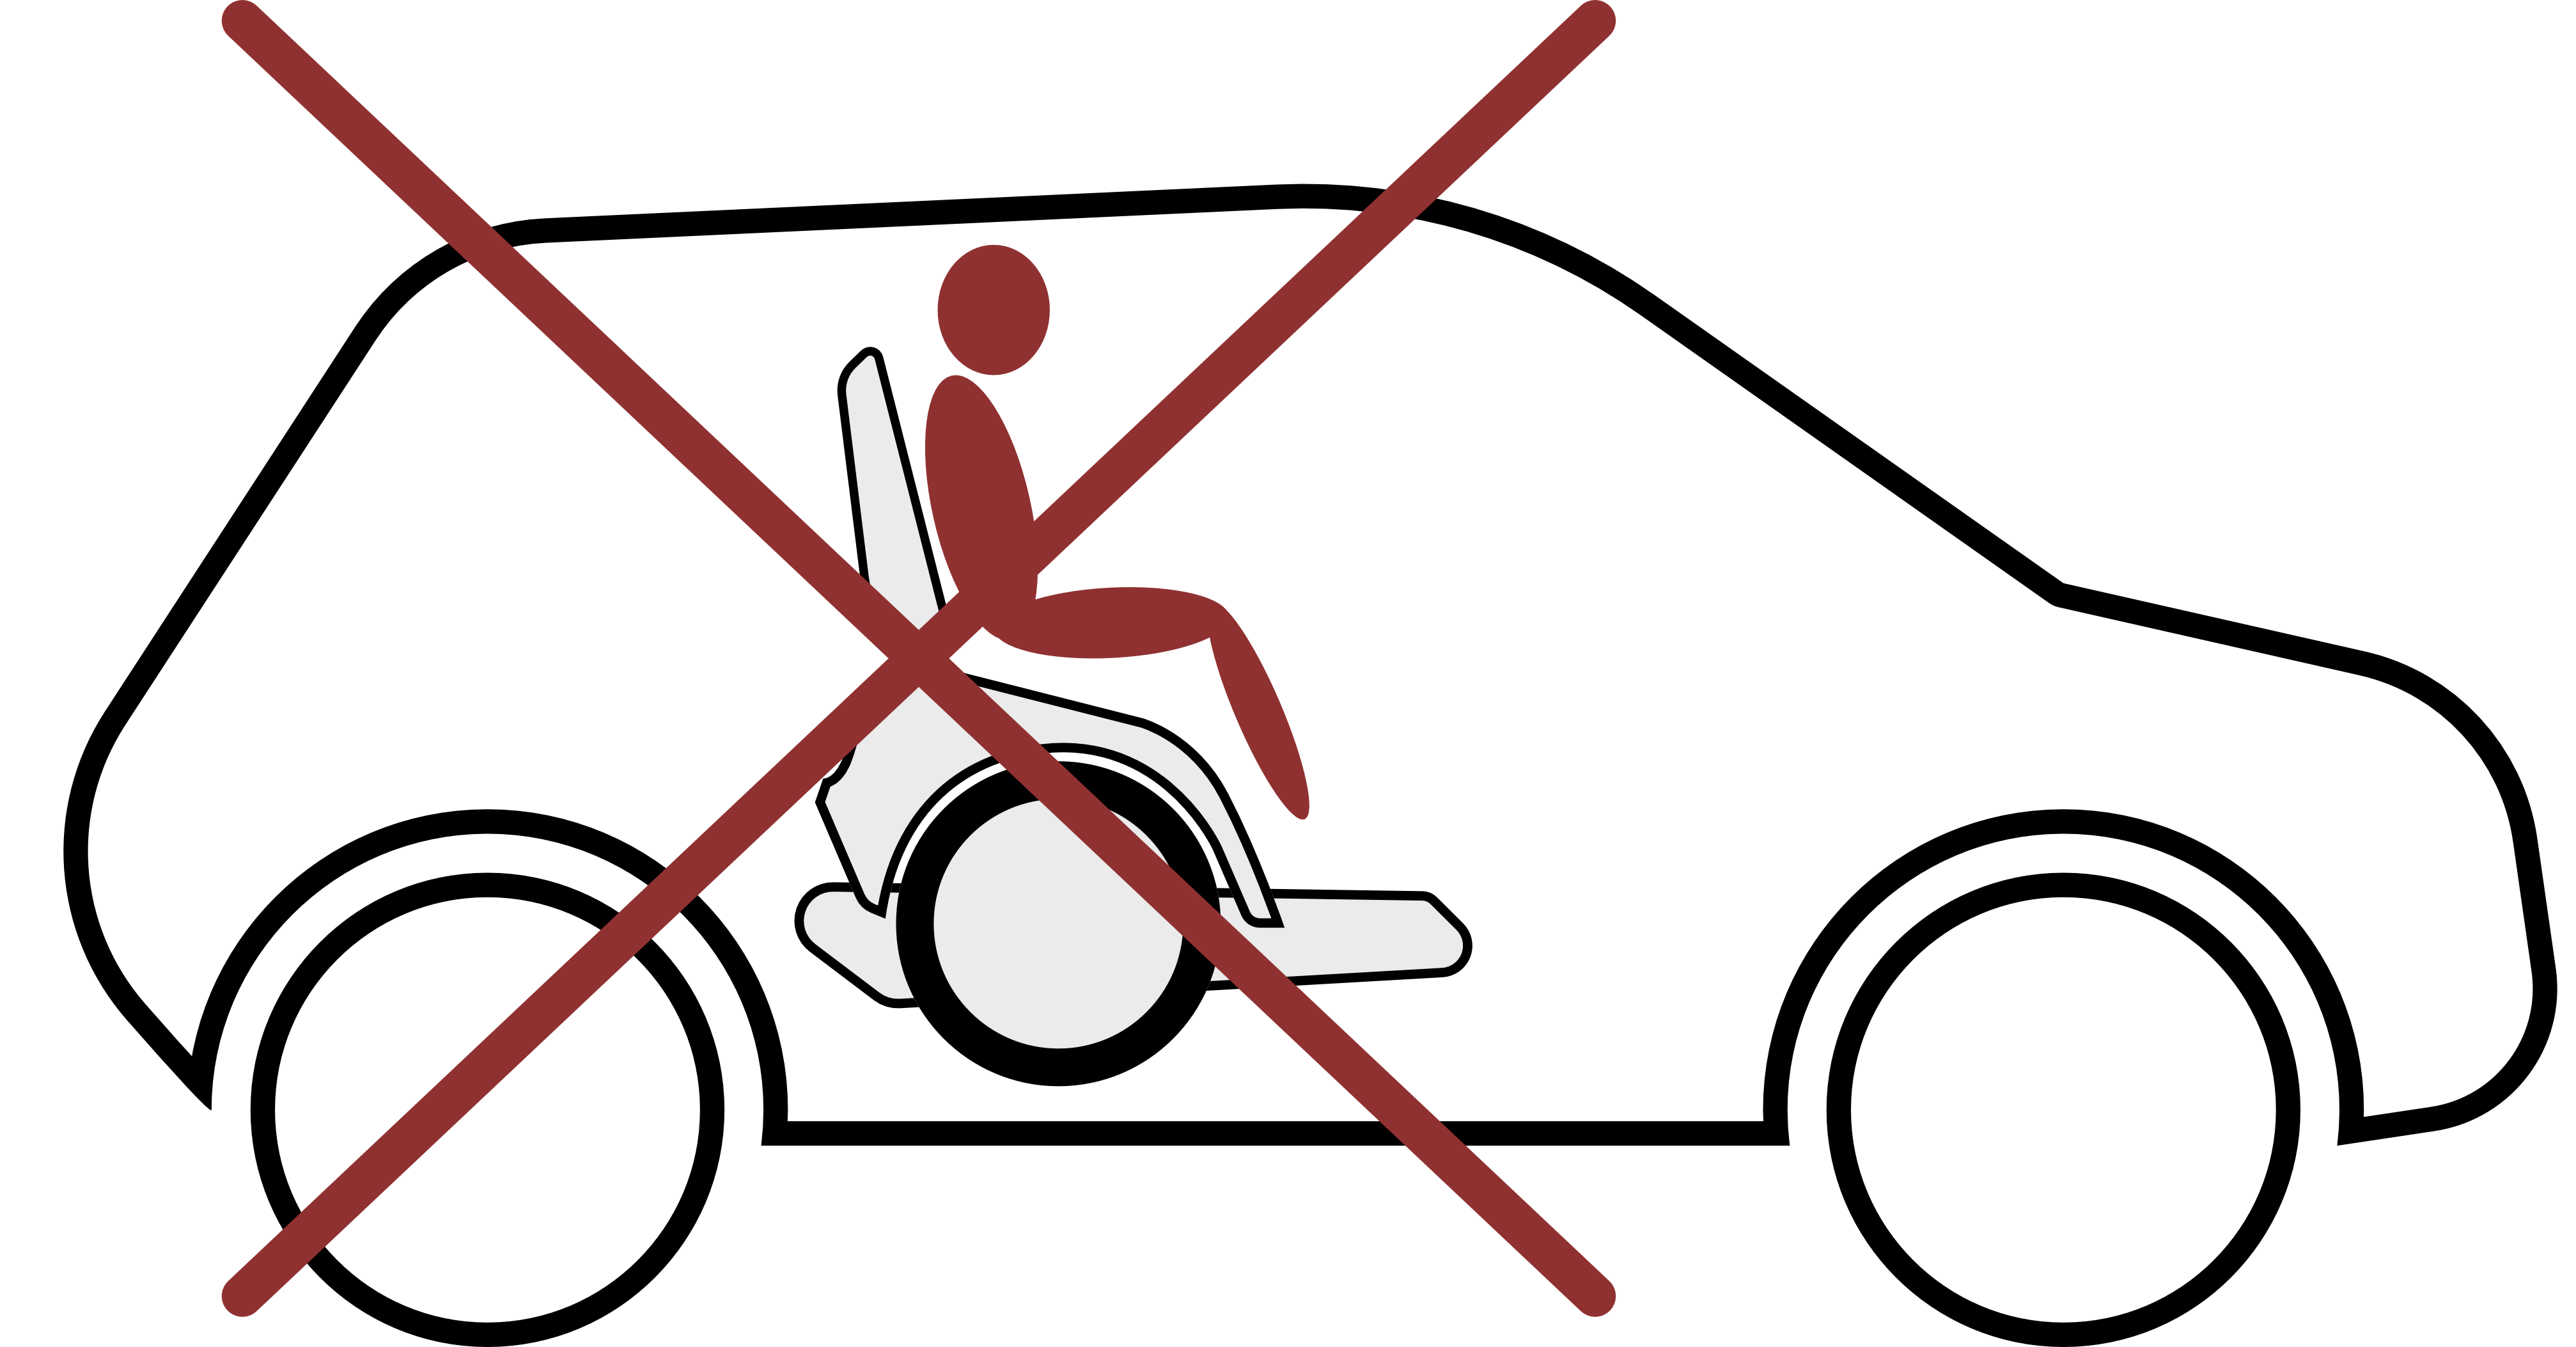 Not permitted for use as a seat in a motorised vehicle